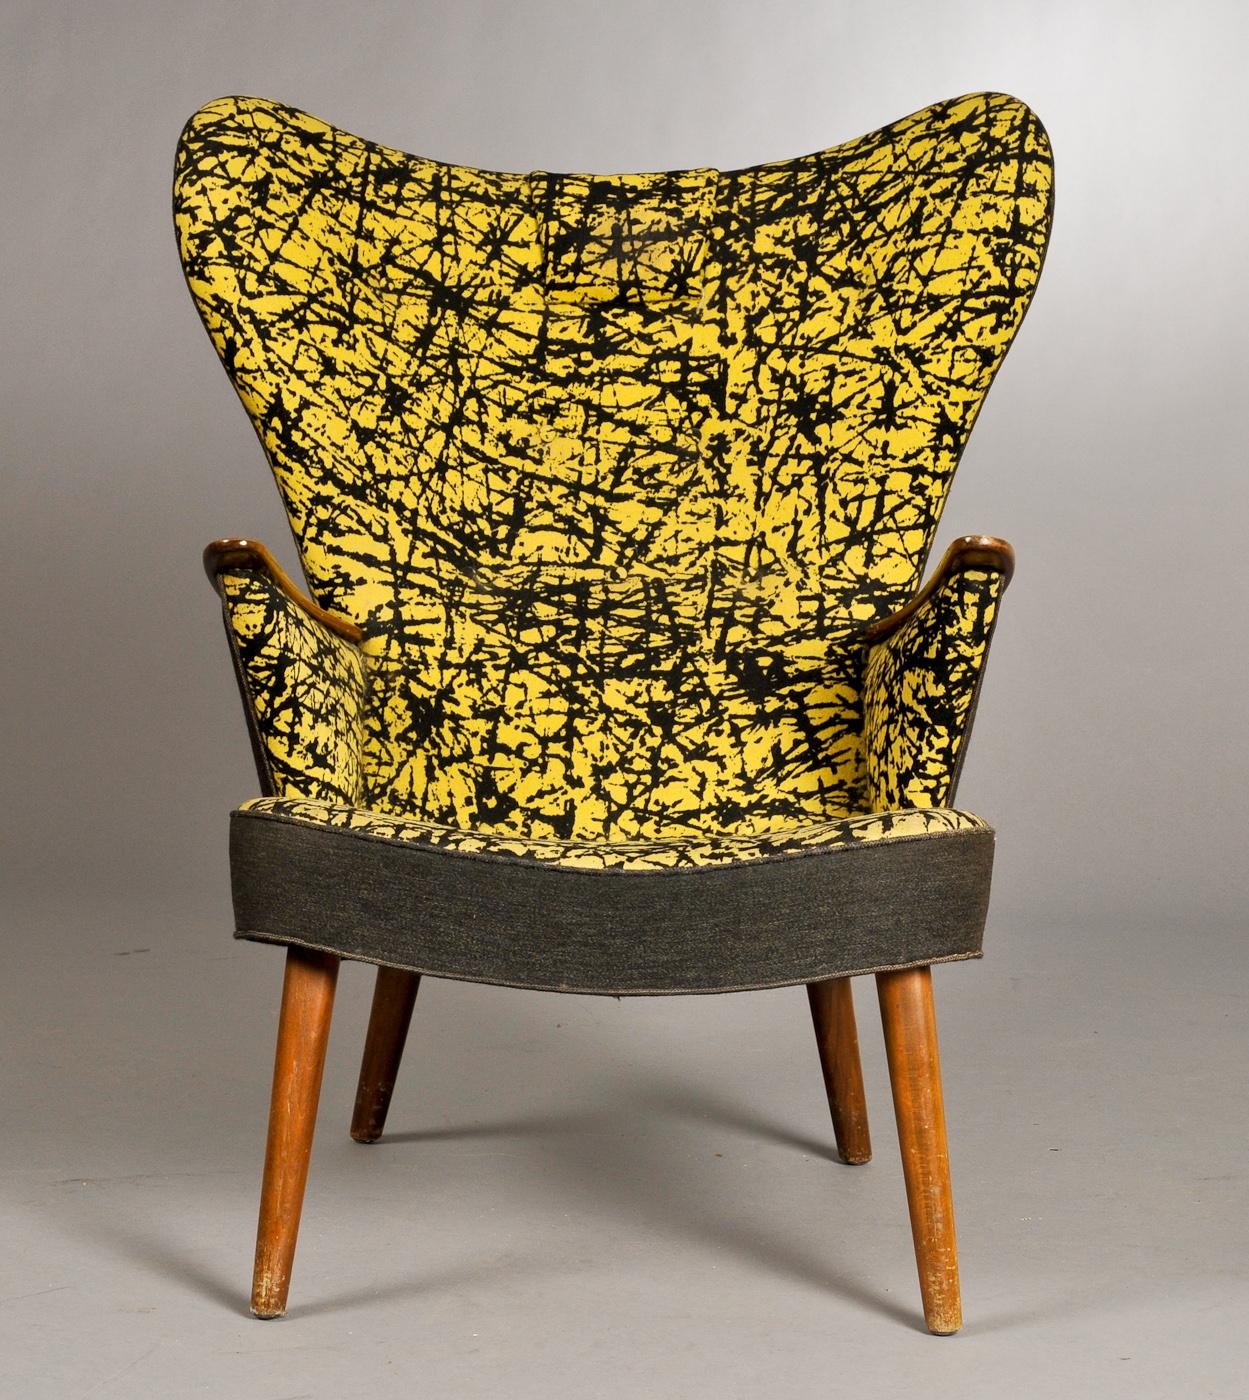 Fabulous lounge with matching stool by Danish designers Ib Madsen & Acton Schubell from the 1950's in the original black and yellow patterned fabric. Stylish, elegant and comfortable.